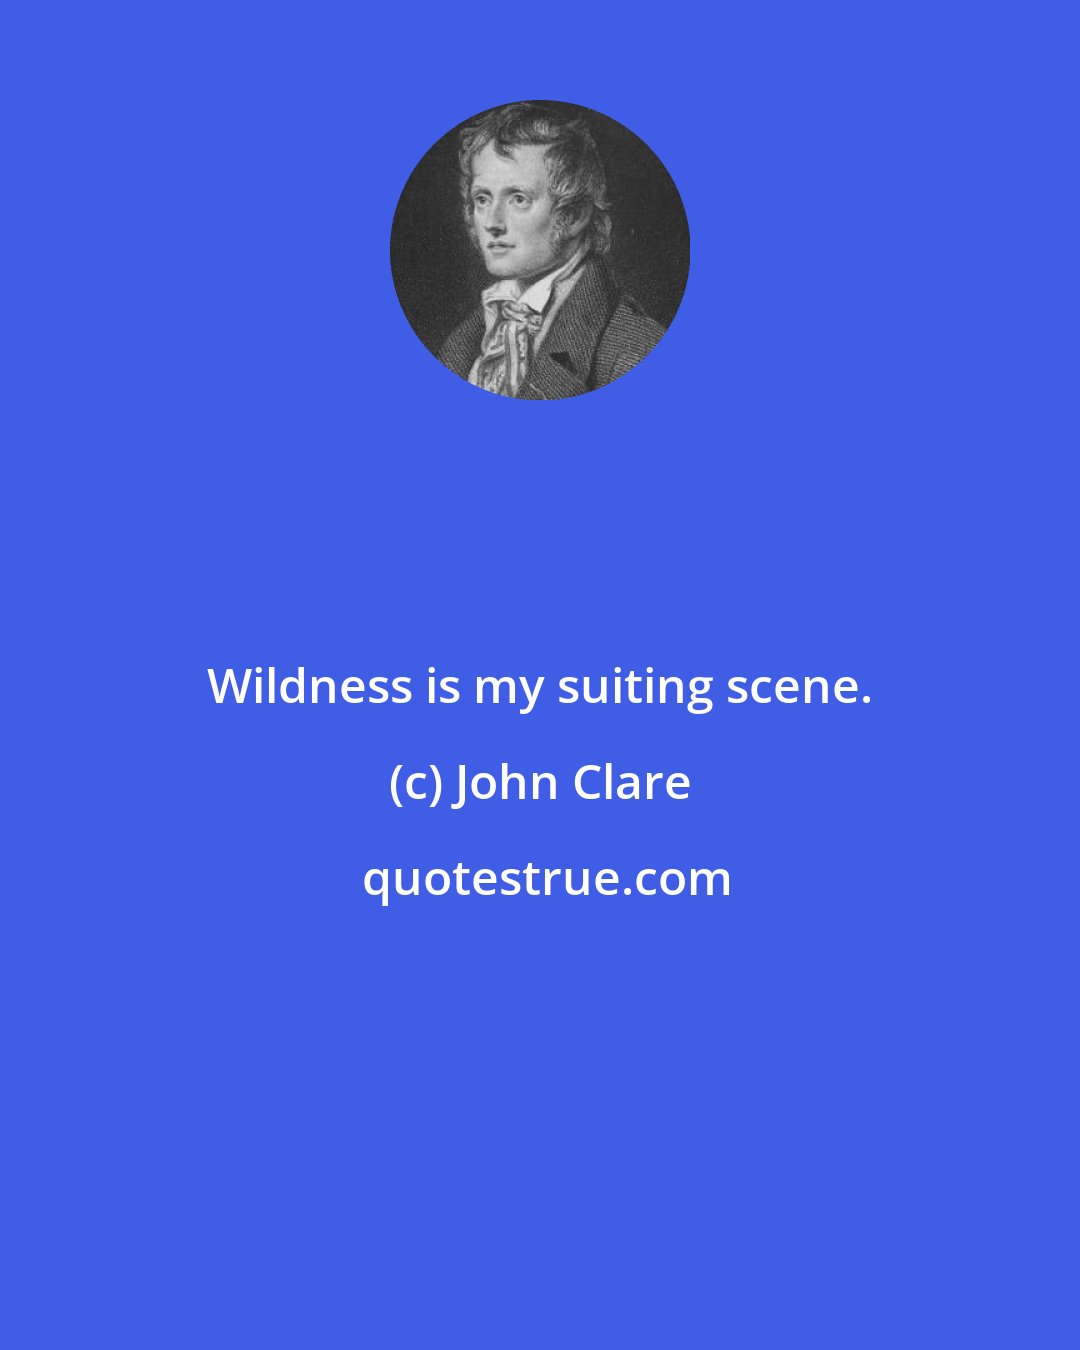 John Clare: Wildness is my suiting scene.